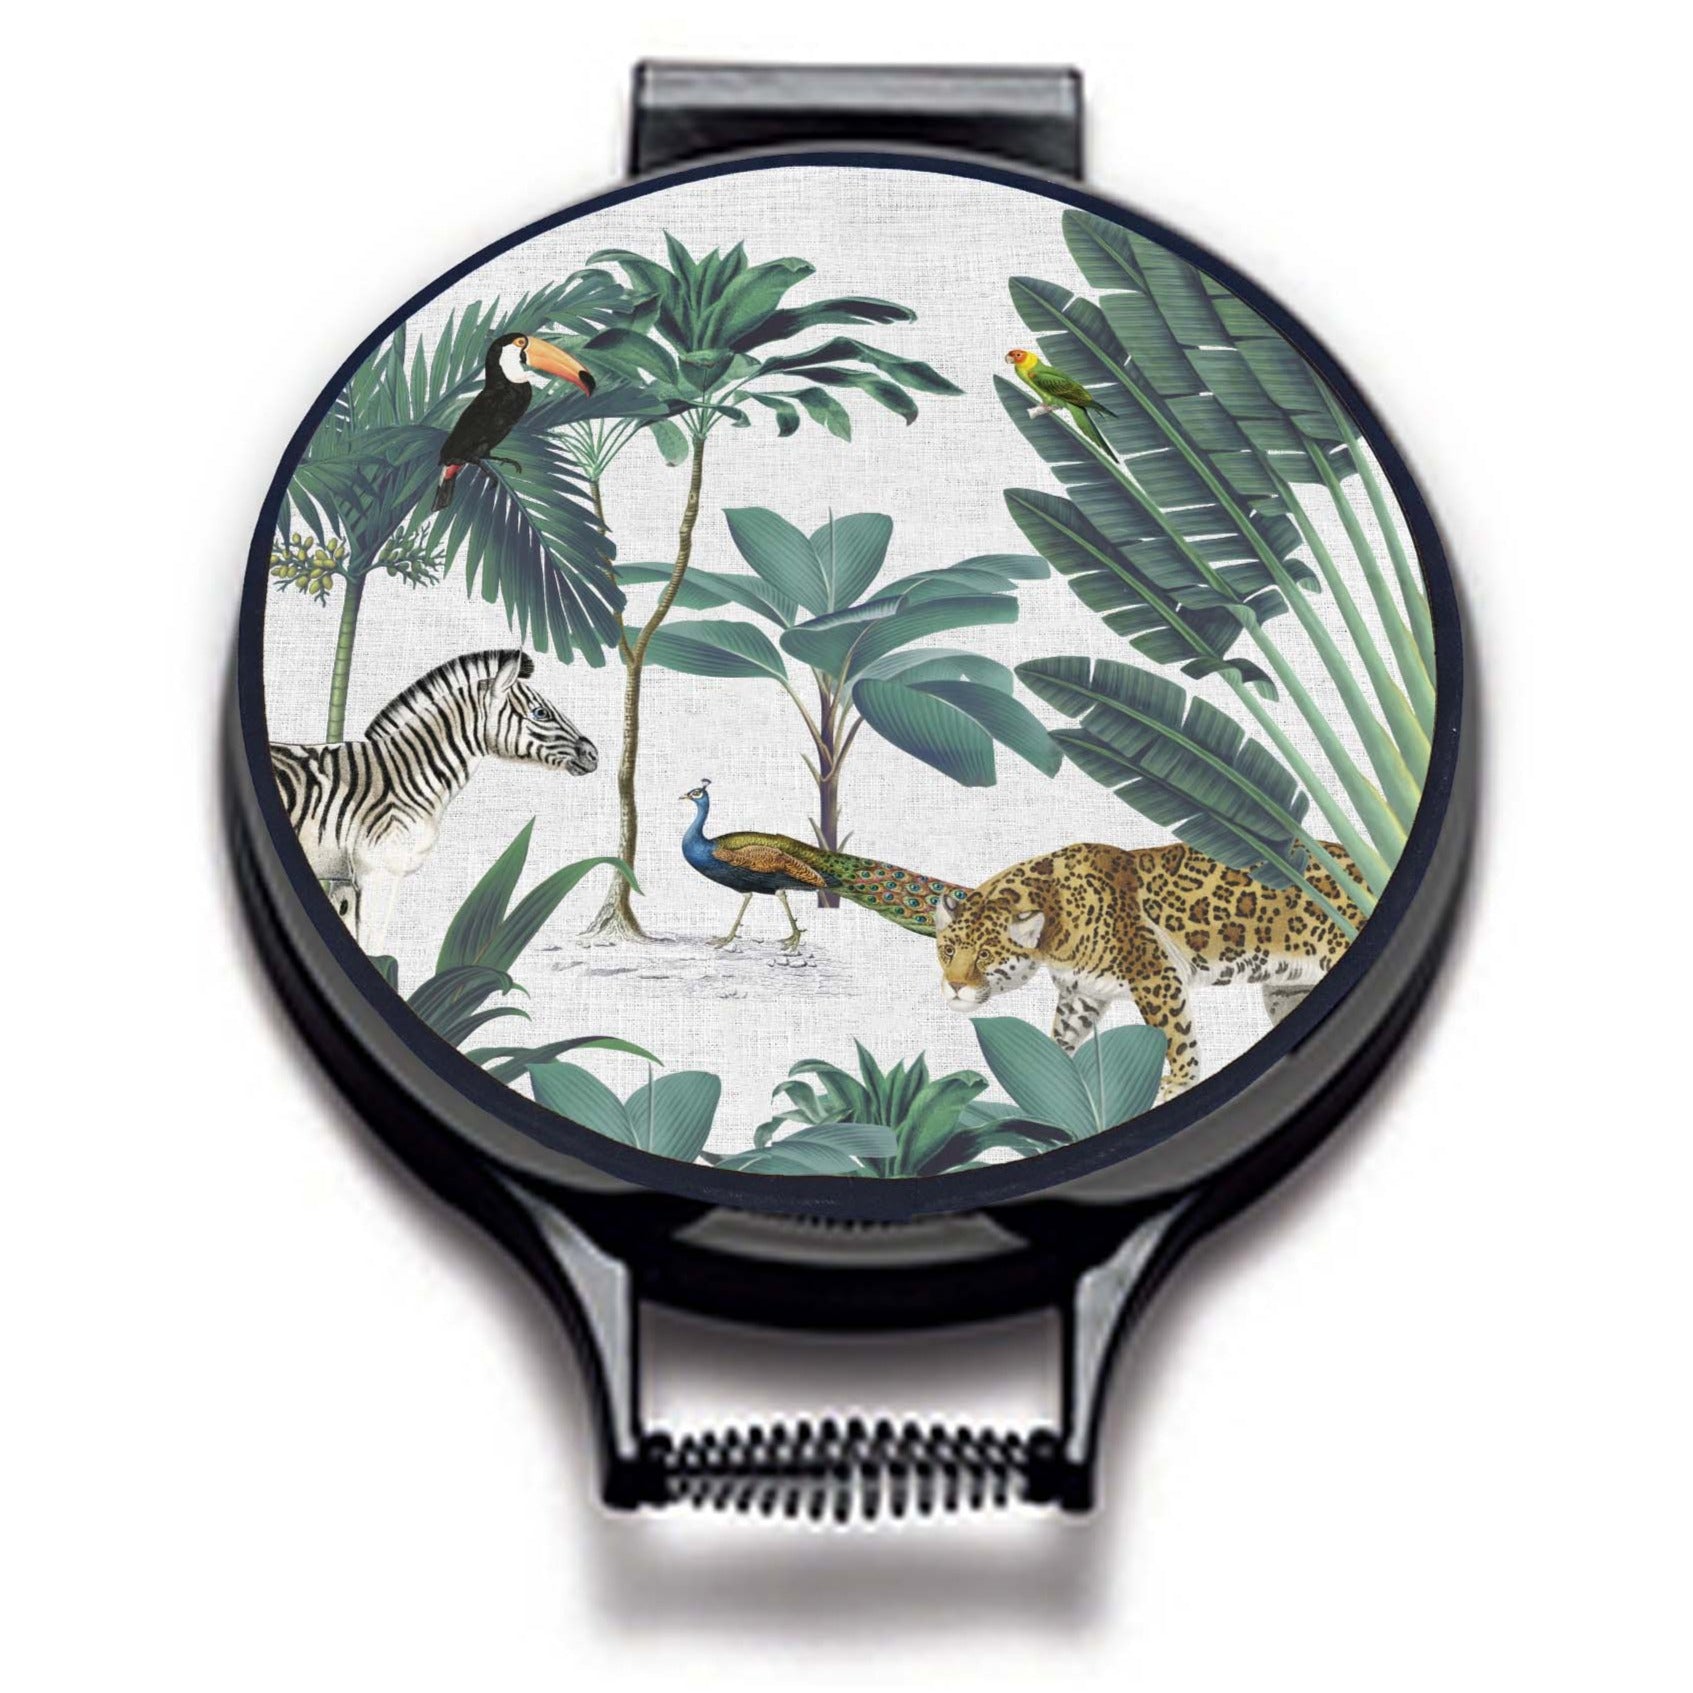 darwin's menagerie tropical print with palms, peacock, zebra, leopard painting on a beige linen circular hob cover with black hemming. Pictured on metal hob lid on an isolated background. Mustard and Gray